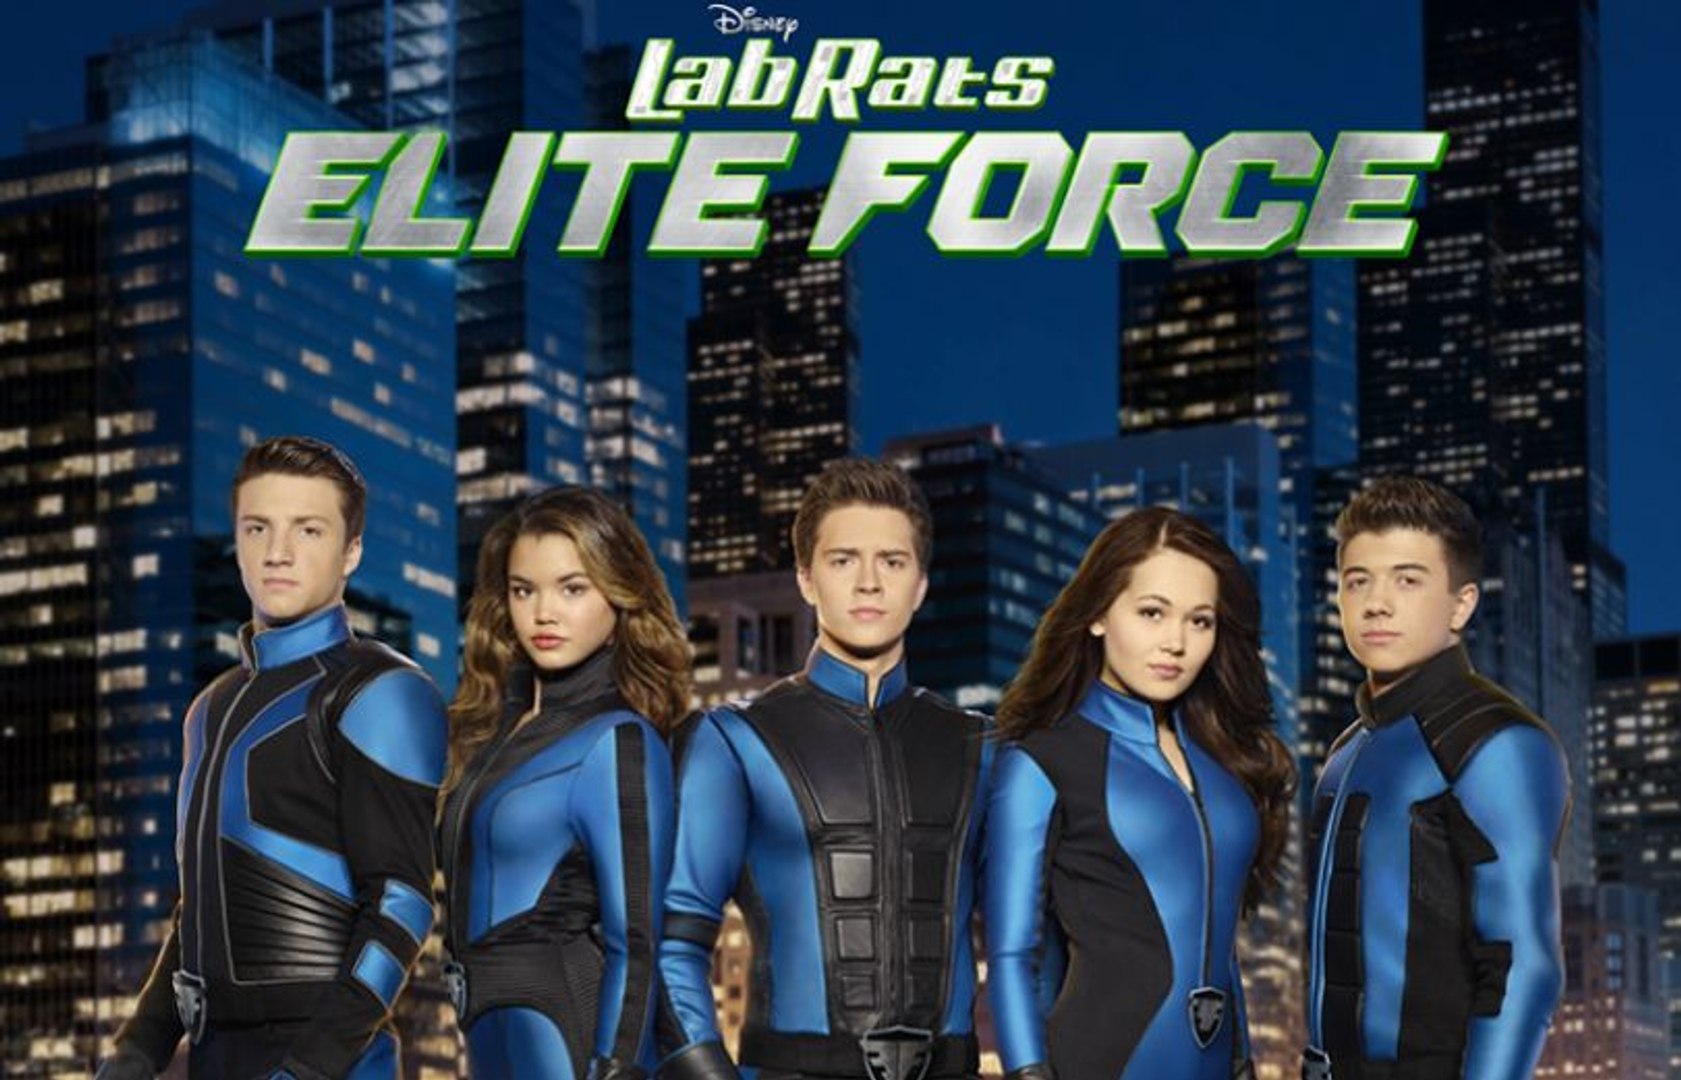 Lab Rats Elite Force S1 EP2 - video Dailymotion